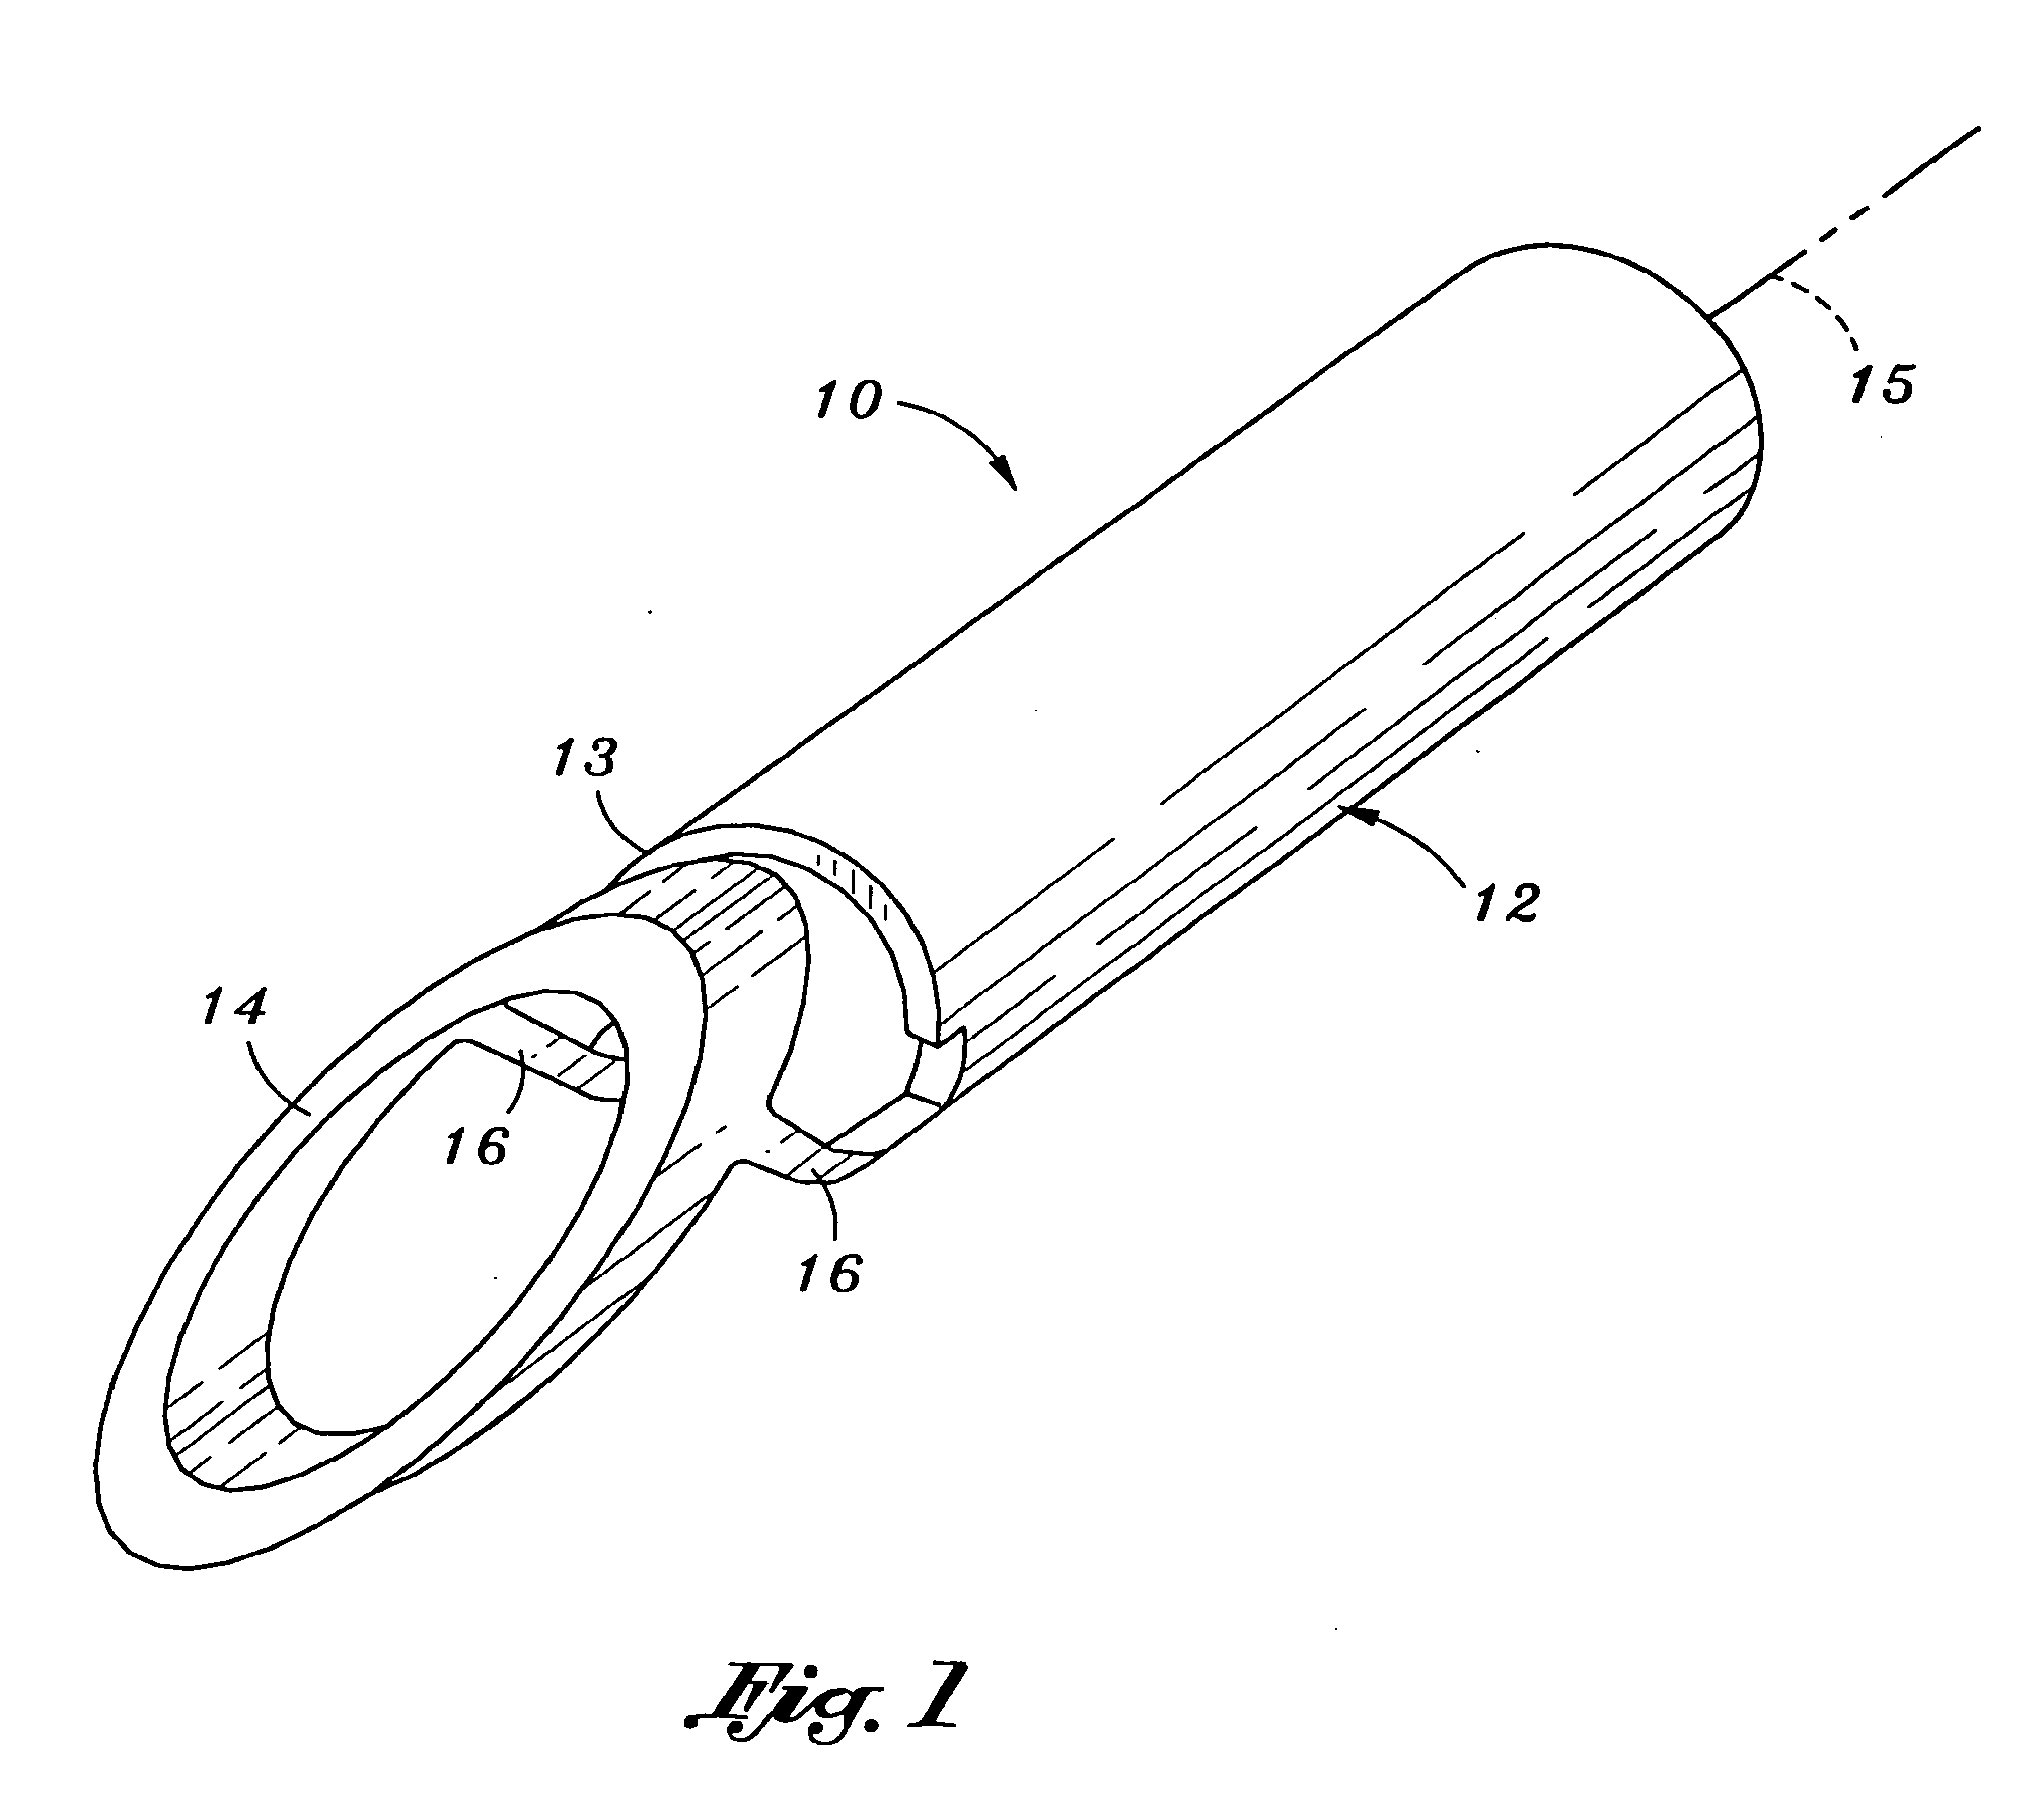 Methods and devices for attaching connective tissues to bone using a knotless suture anchoring device